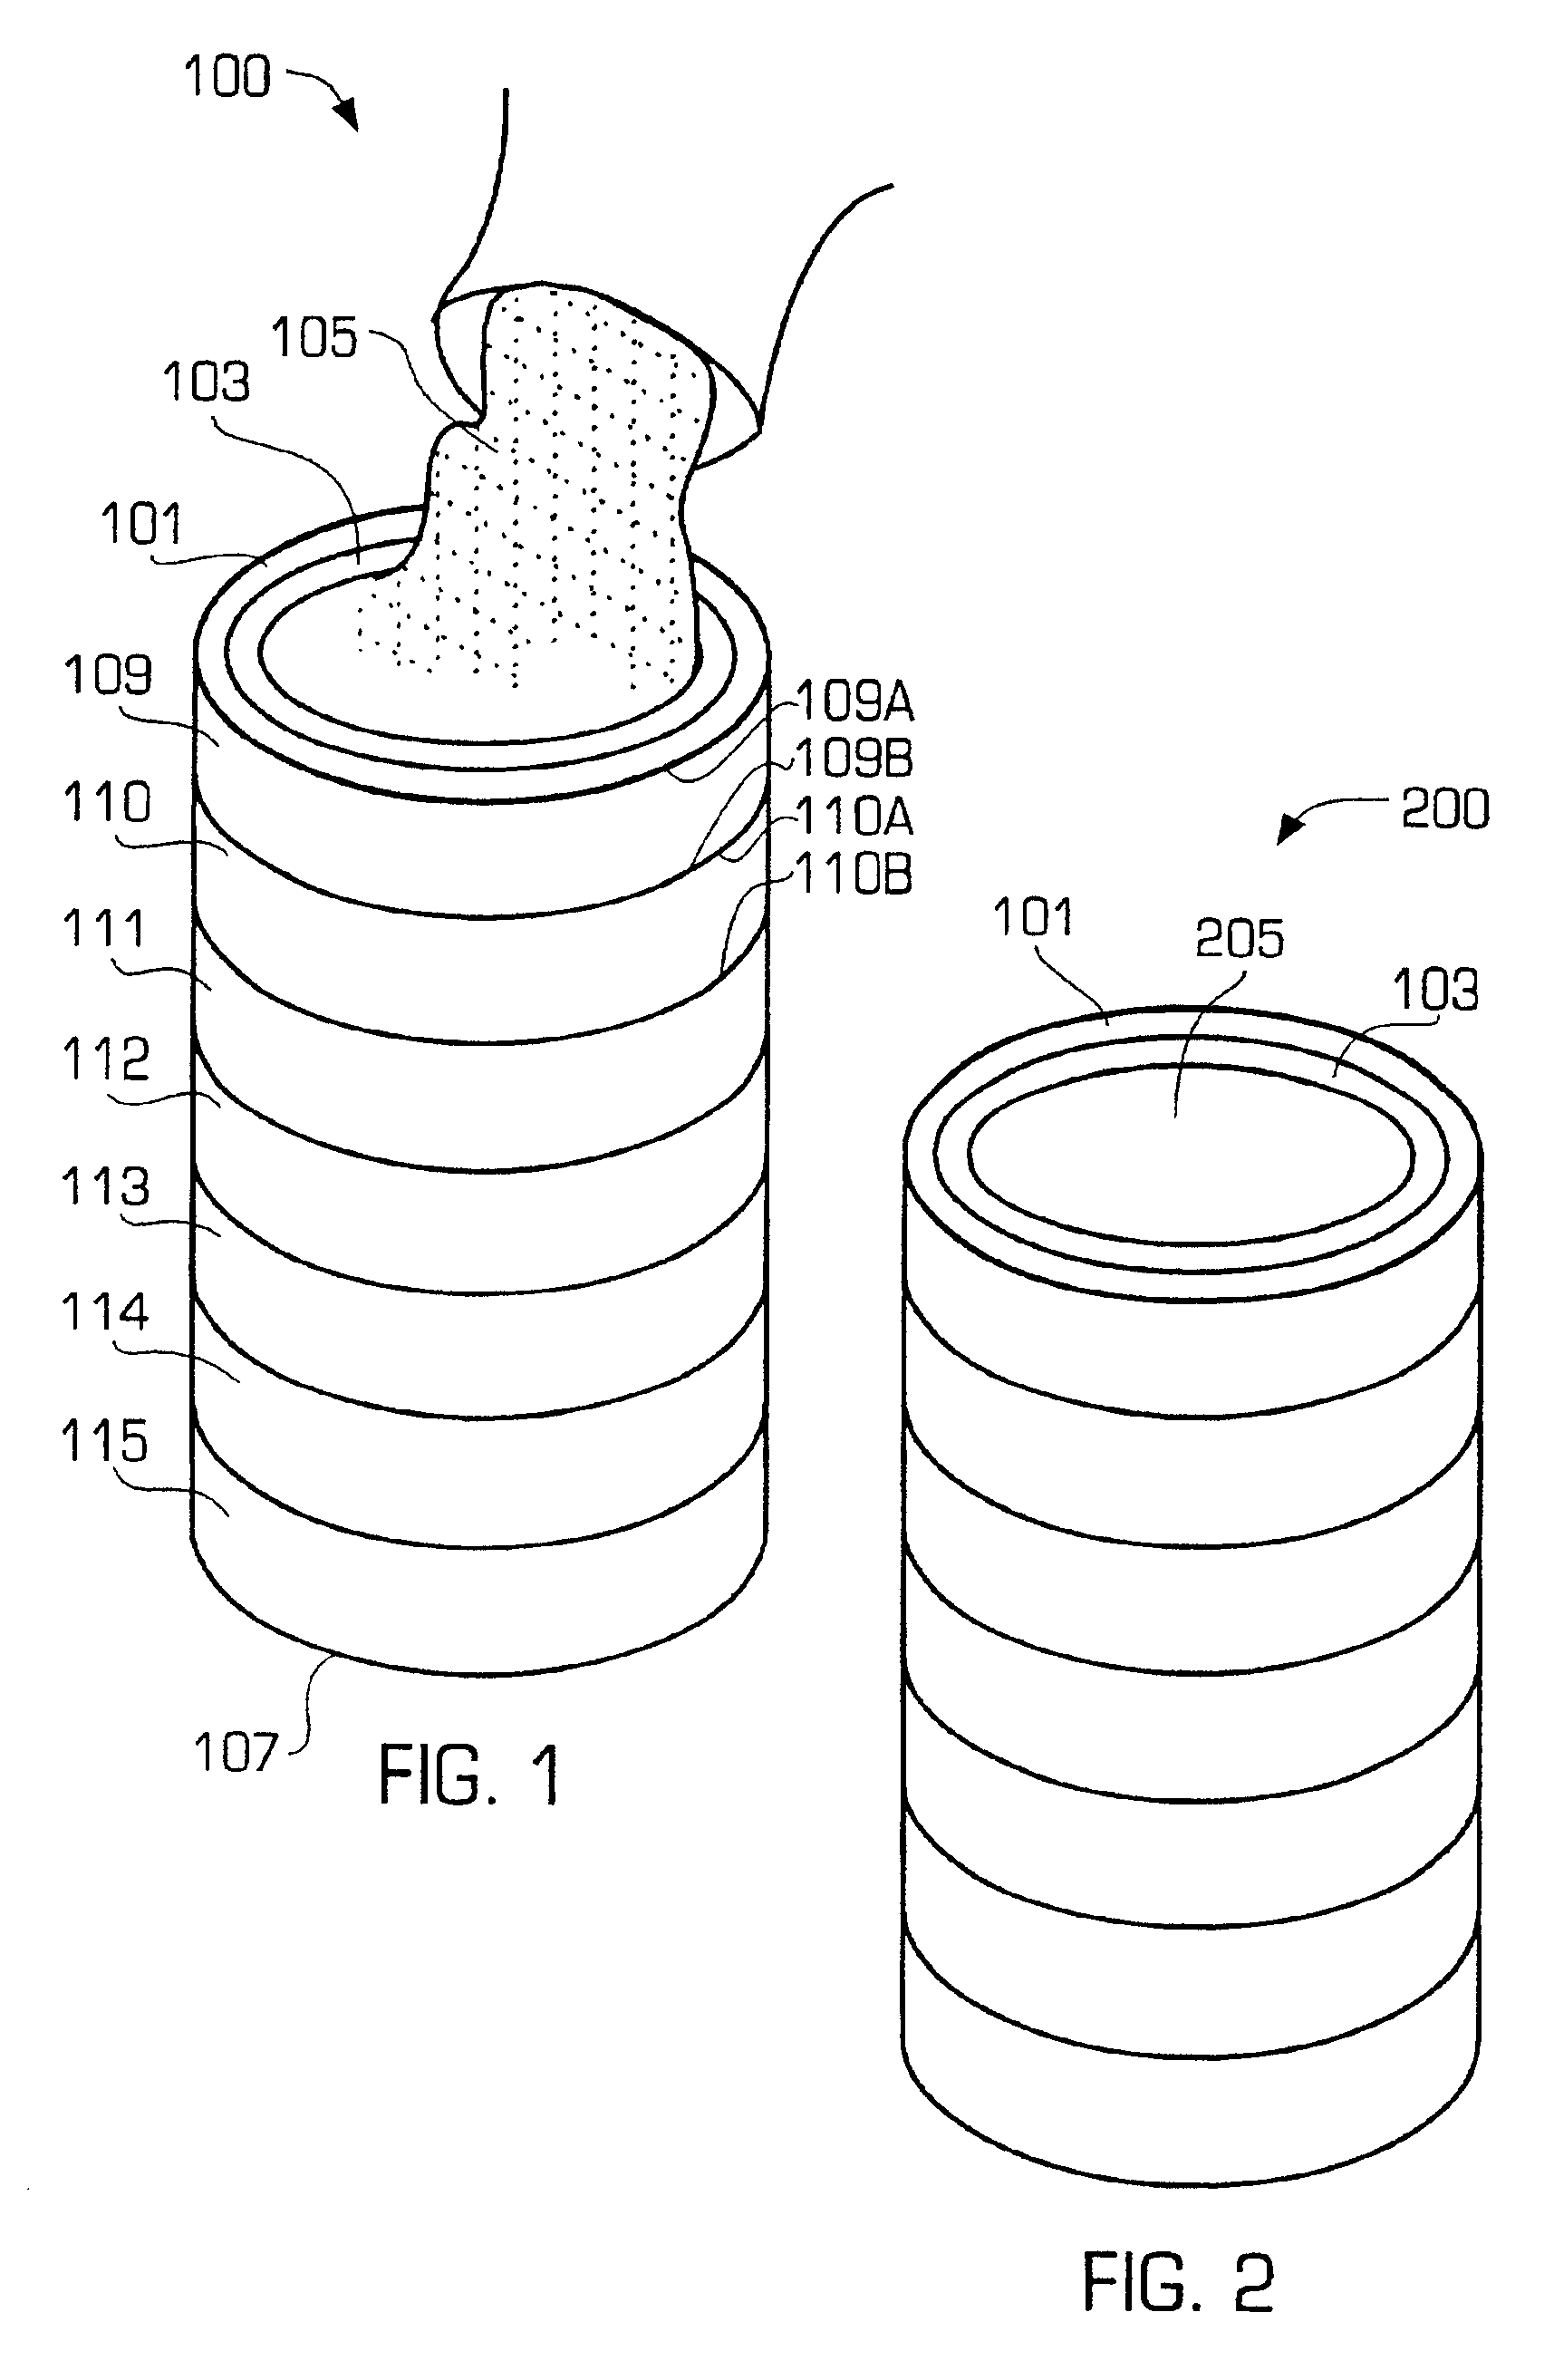 Method of manufacturing a stay-in-place form